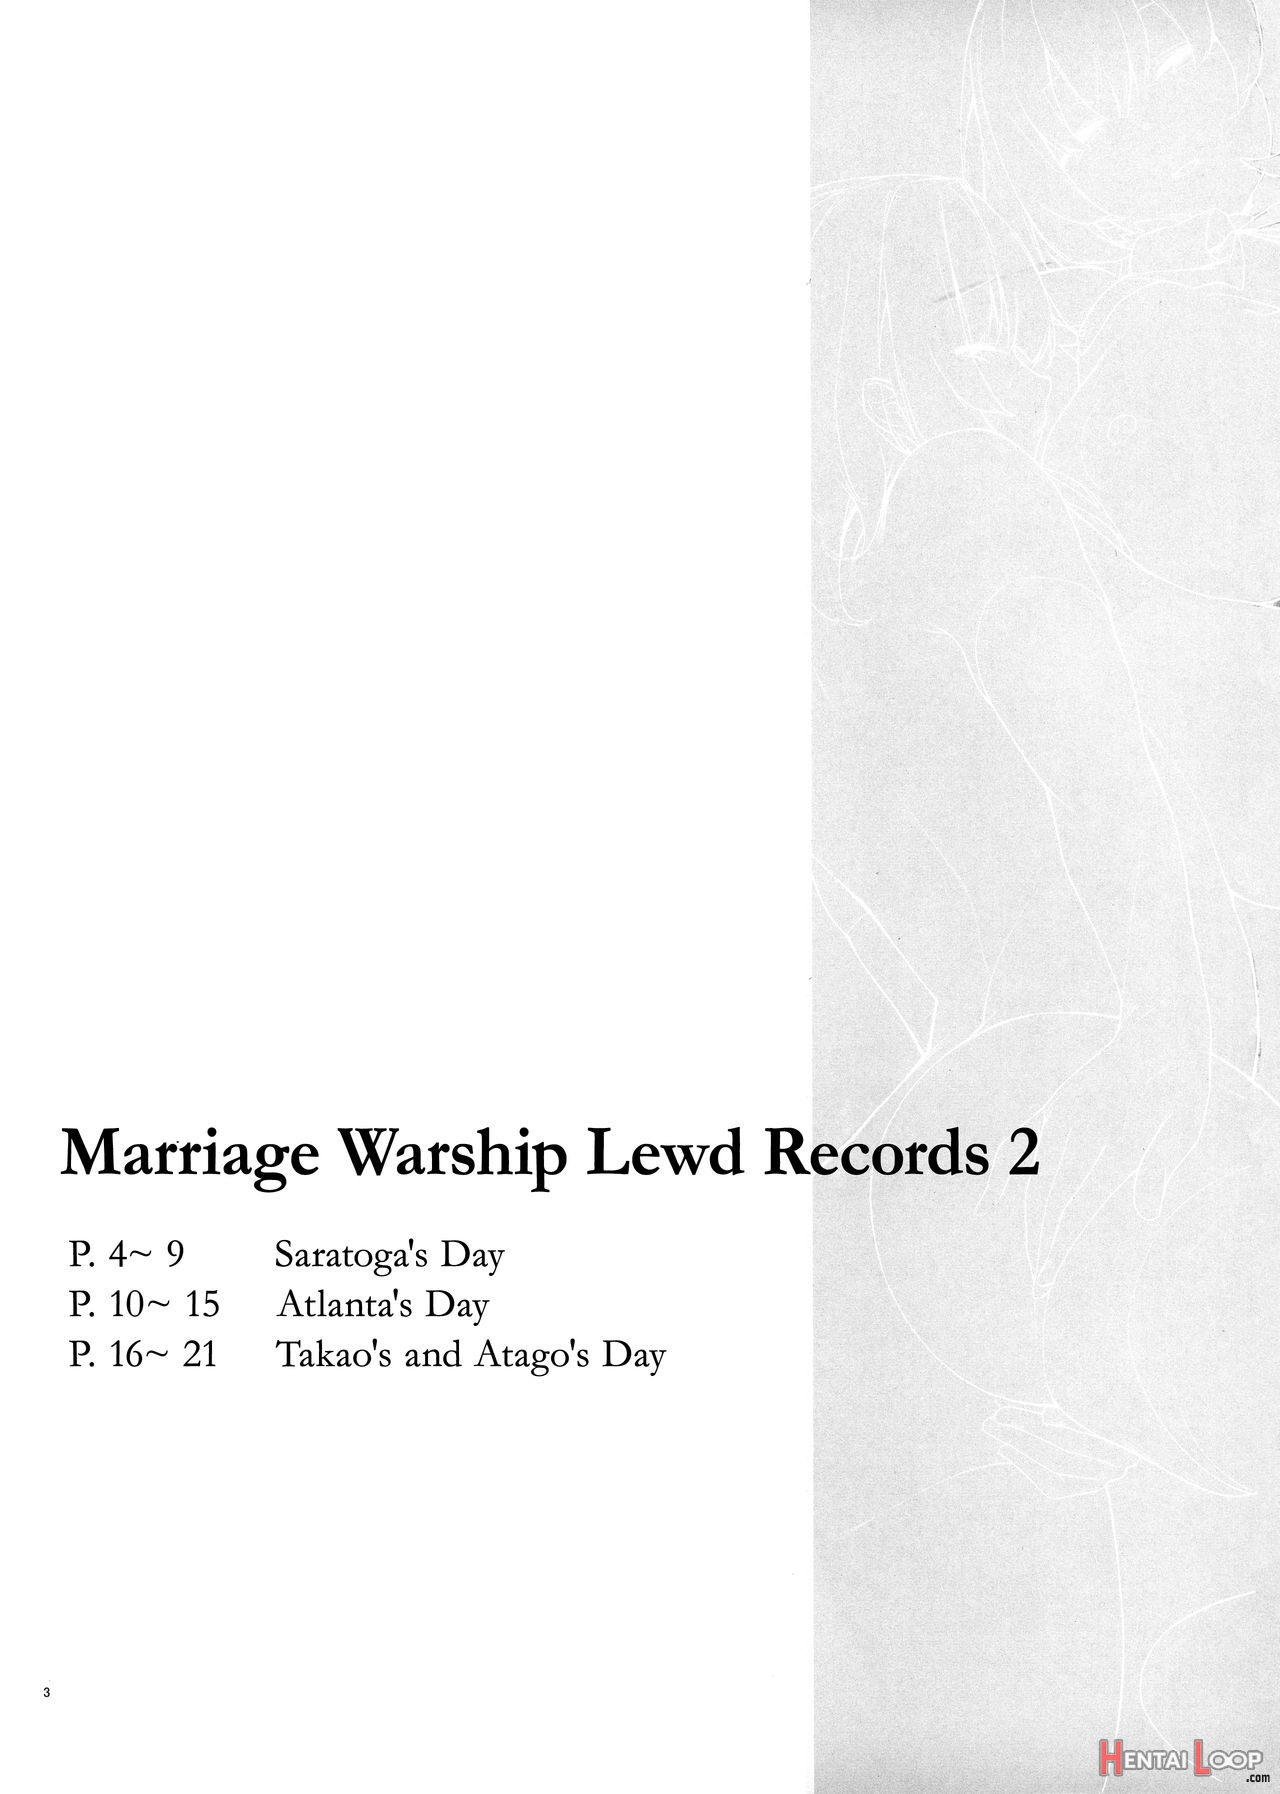 Warship Marriage Lewd Records 2 page 4